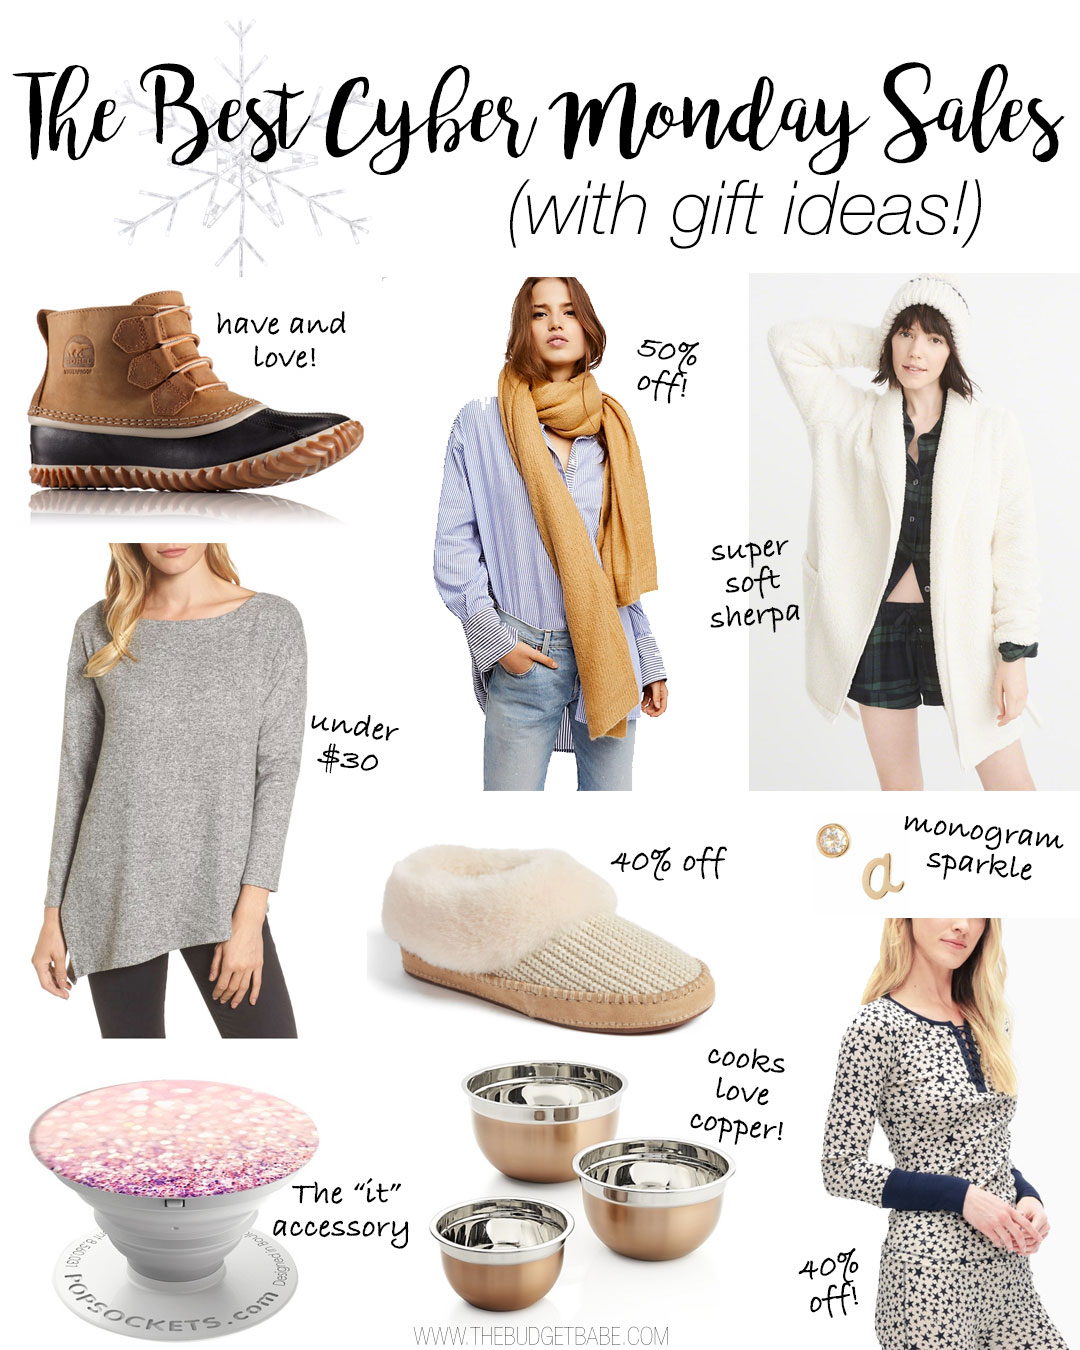 The Budget Babe shares her top Cyber Monday sales with affordable gift ideas for everyone